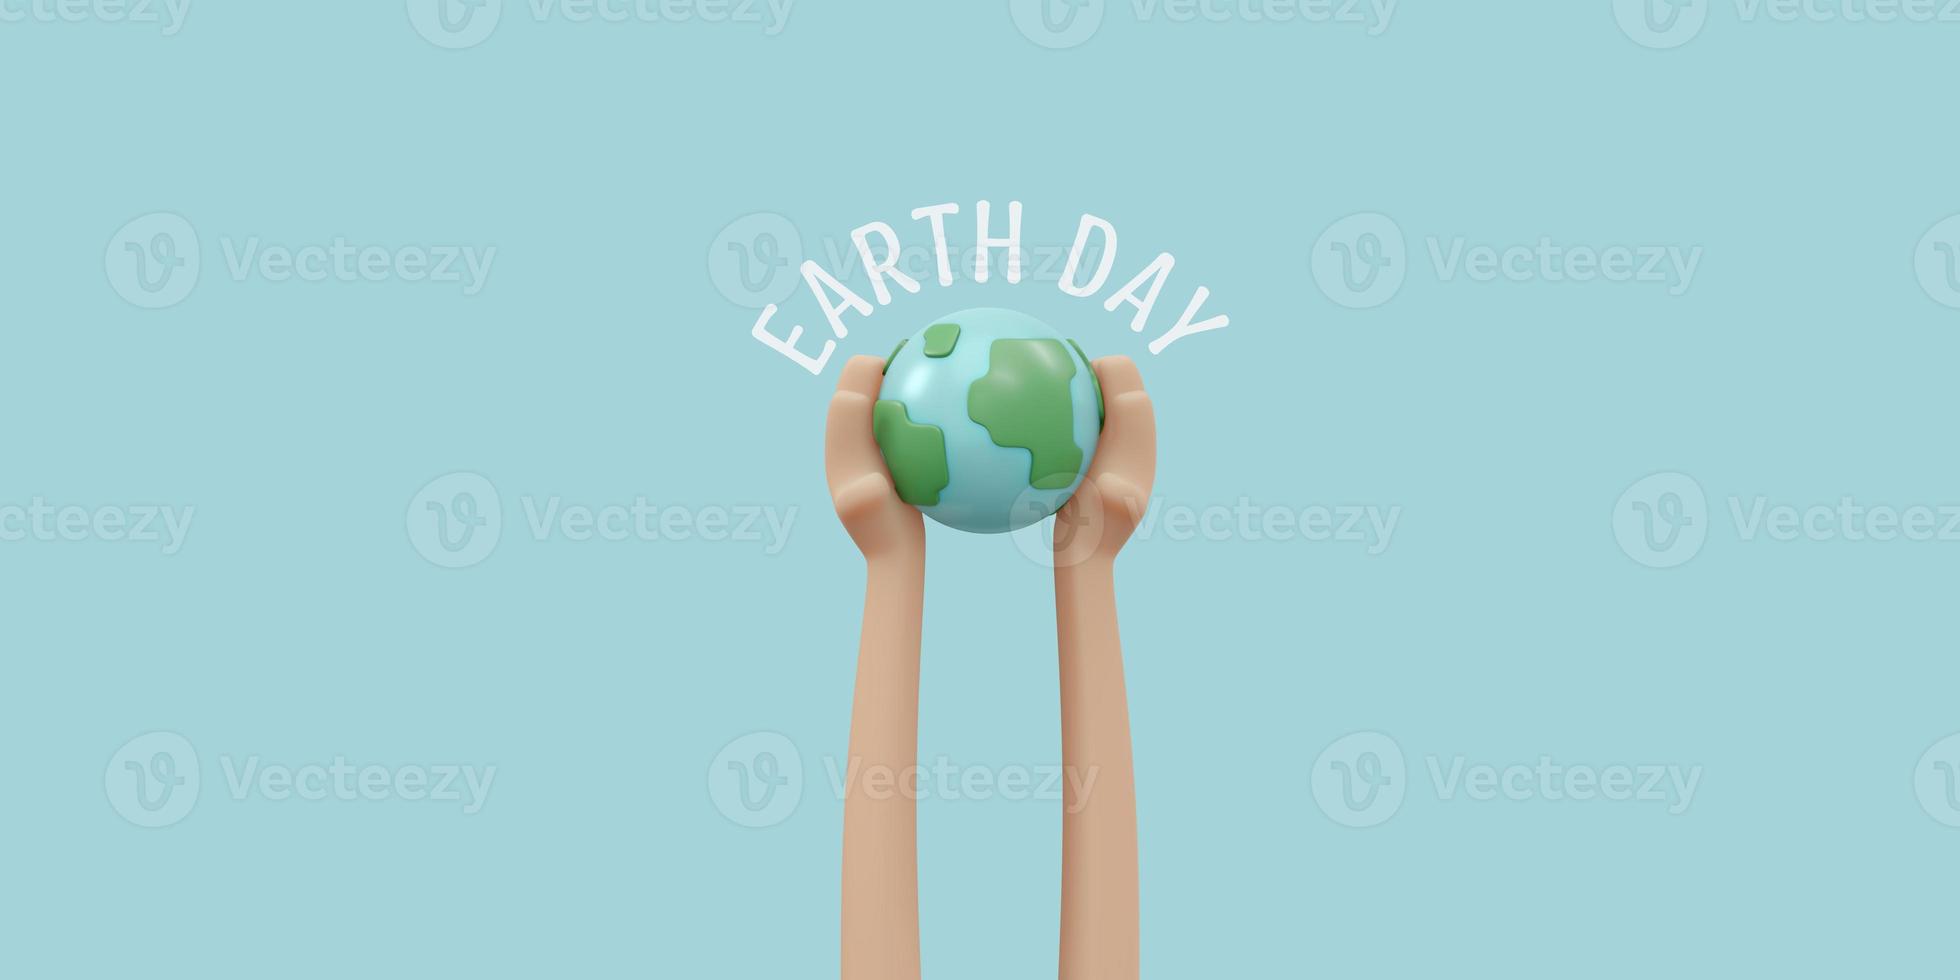 3D Rendering of hand holding earth icon concept of earth day background, banner, card, poster with text inscription. 3D Render illustration cartoon style. photo